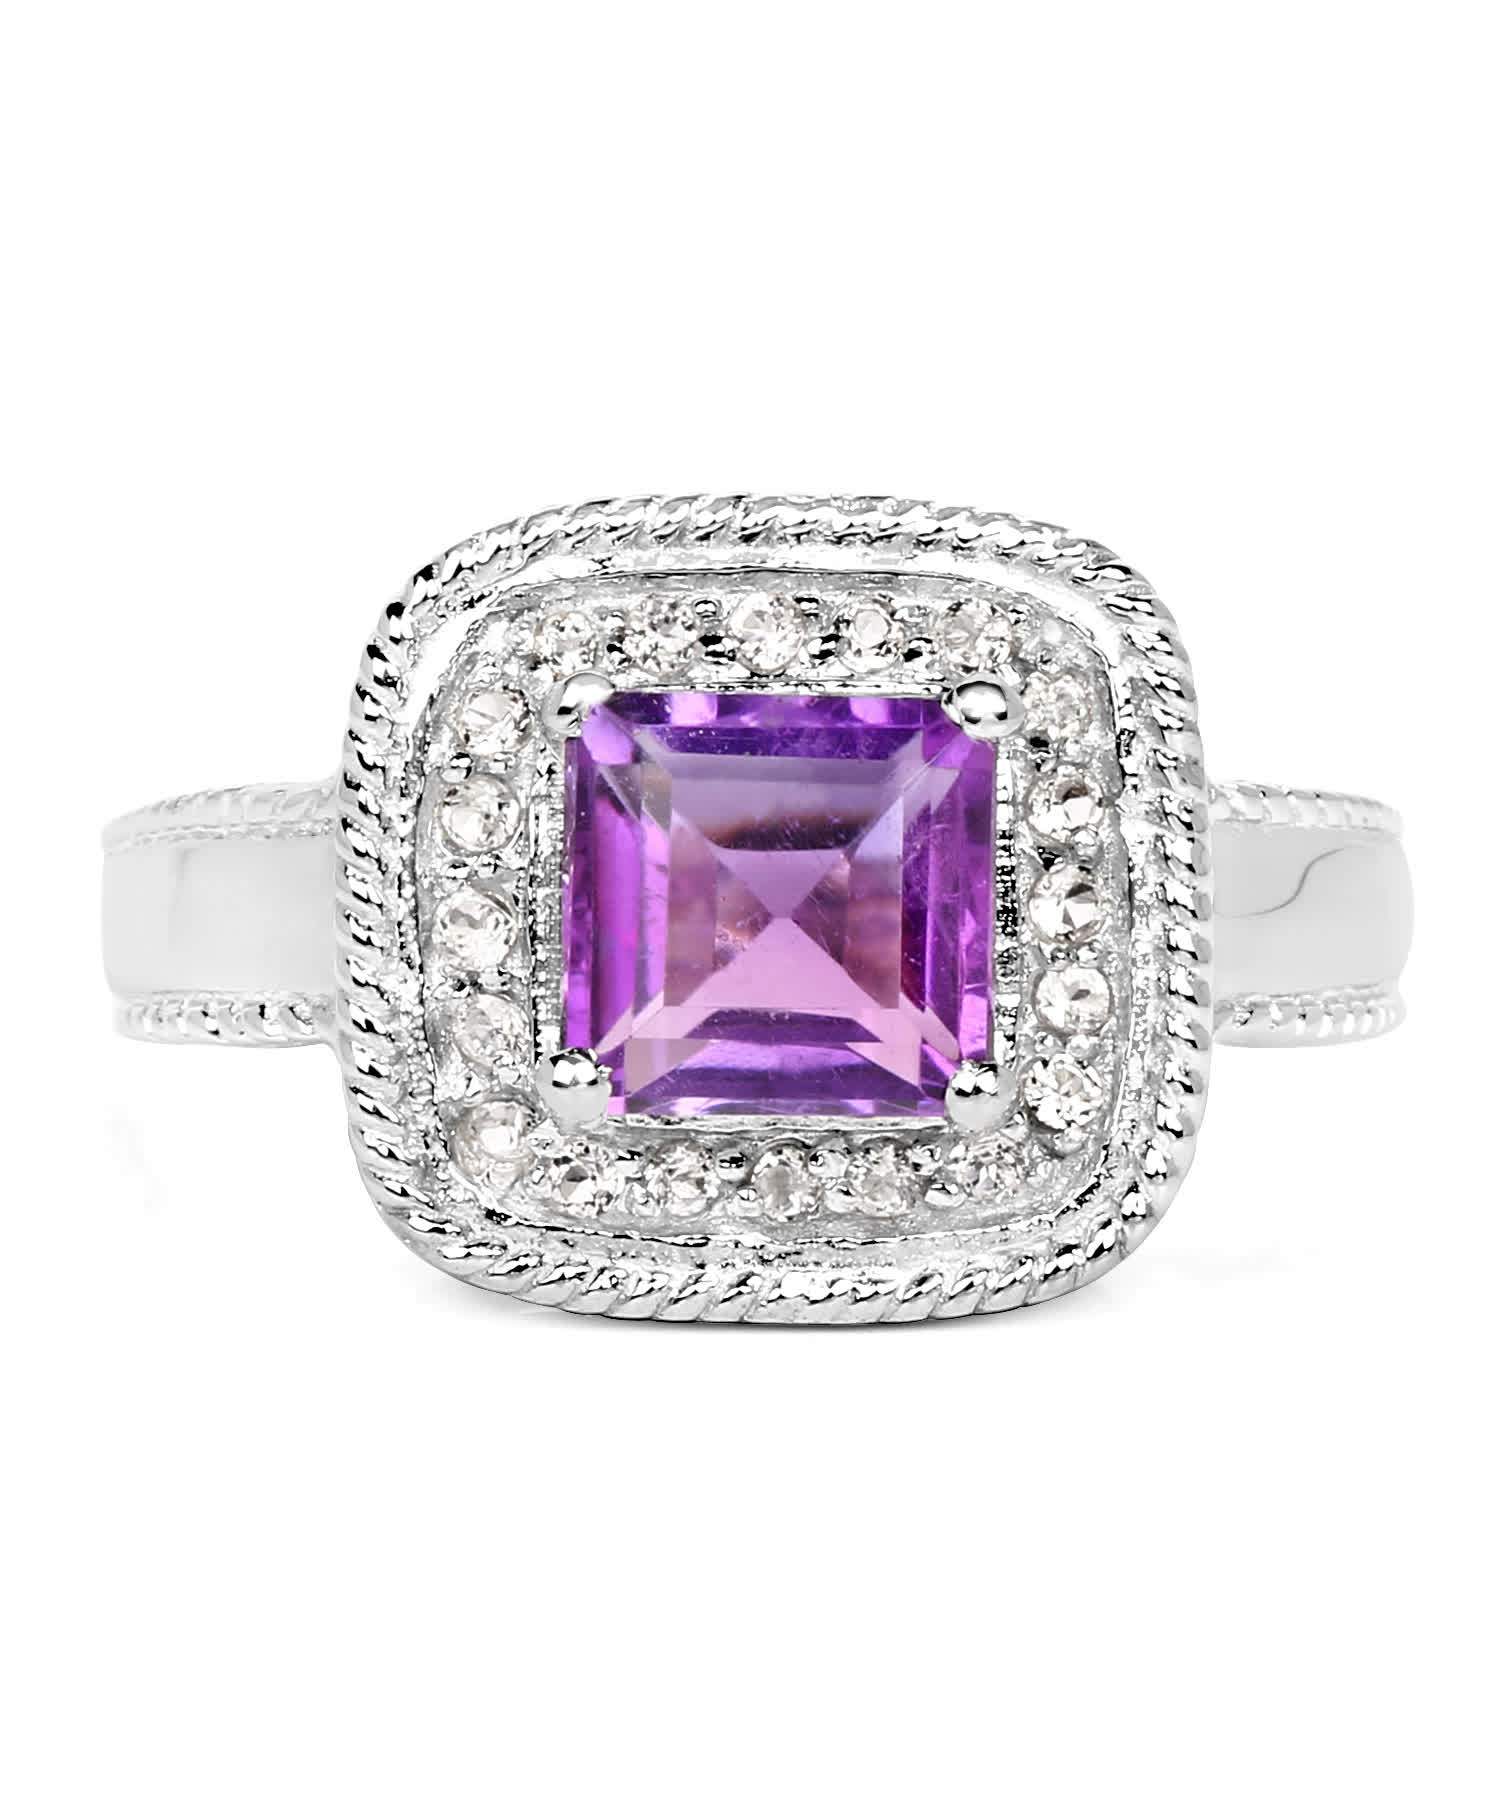 1.80ctw Natural Amethyst and Topaz Rhodium Plated 925 Sterling Silver Fashion Ring View 3